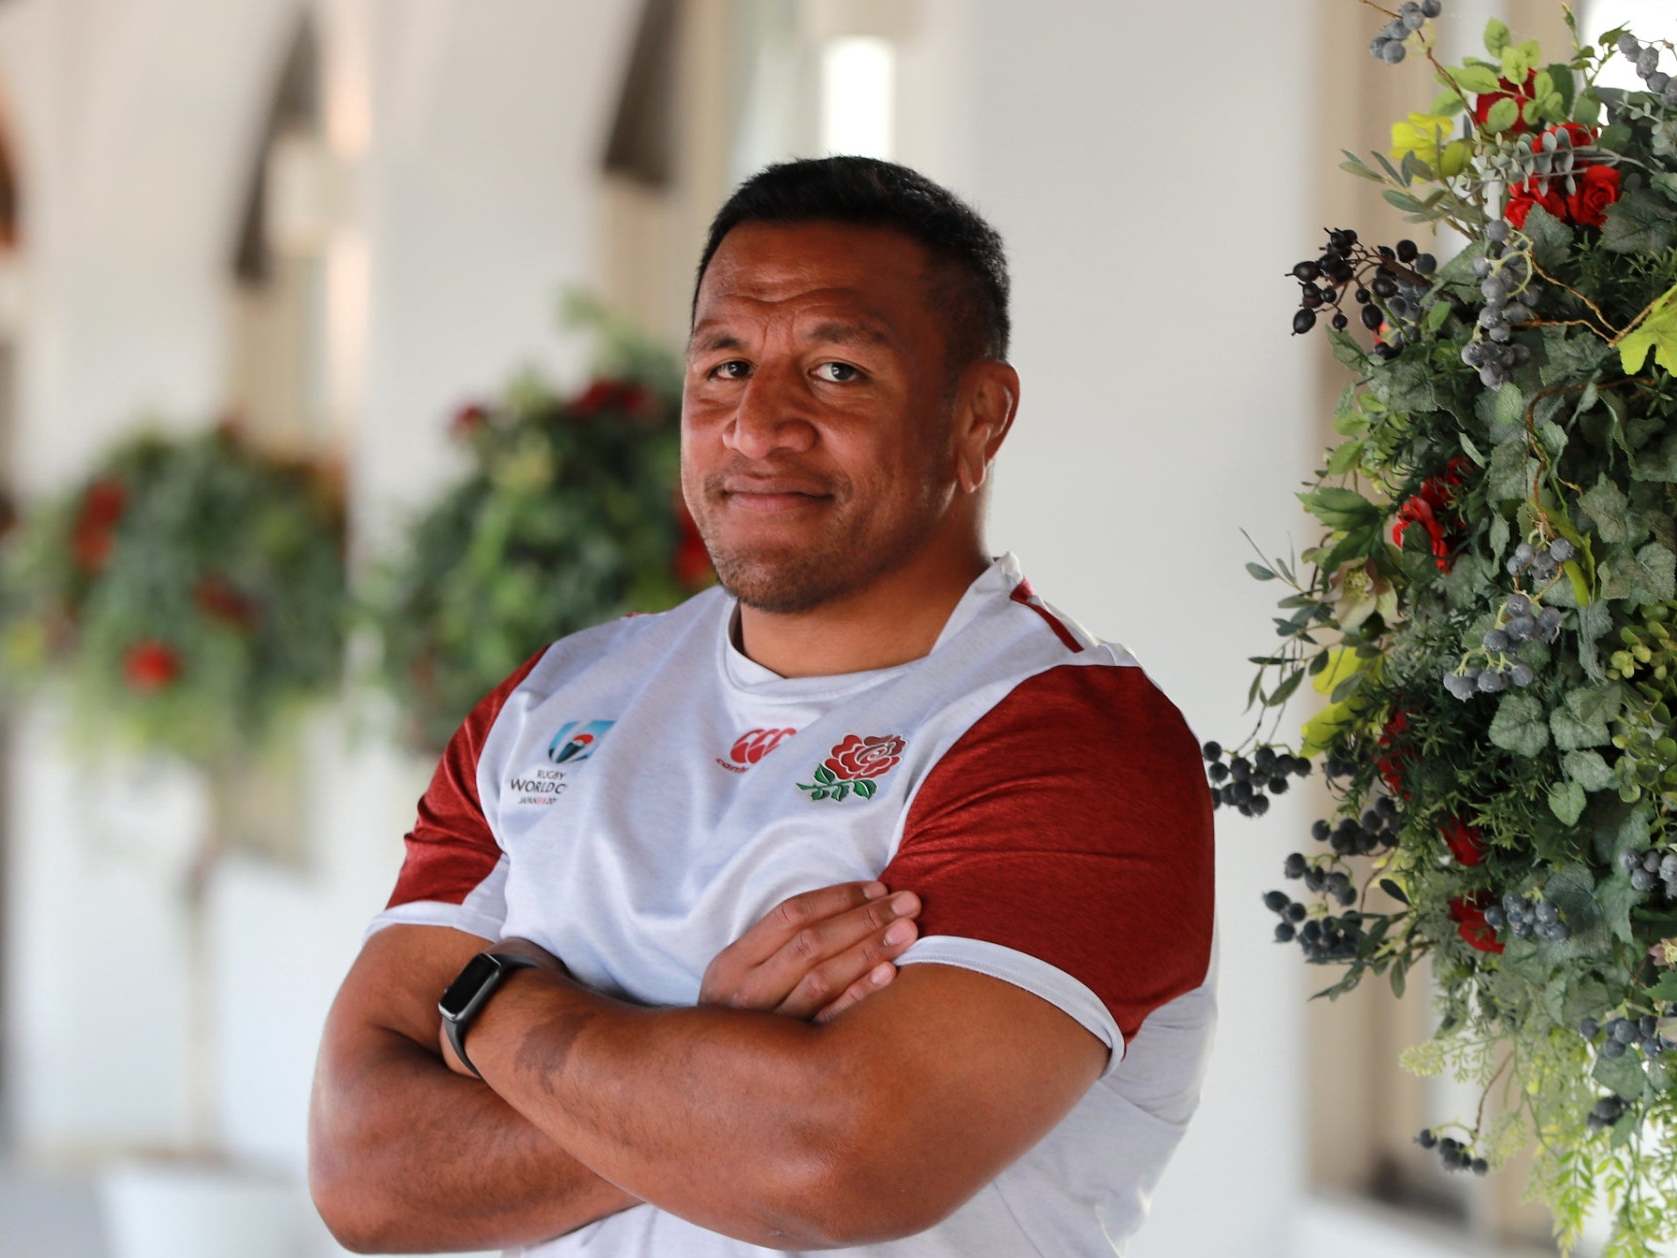 Rugby World Cup 2019: Typhoon Hagibis impacts Mako Vunipola focus as England prop aims to prove fitness